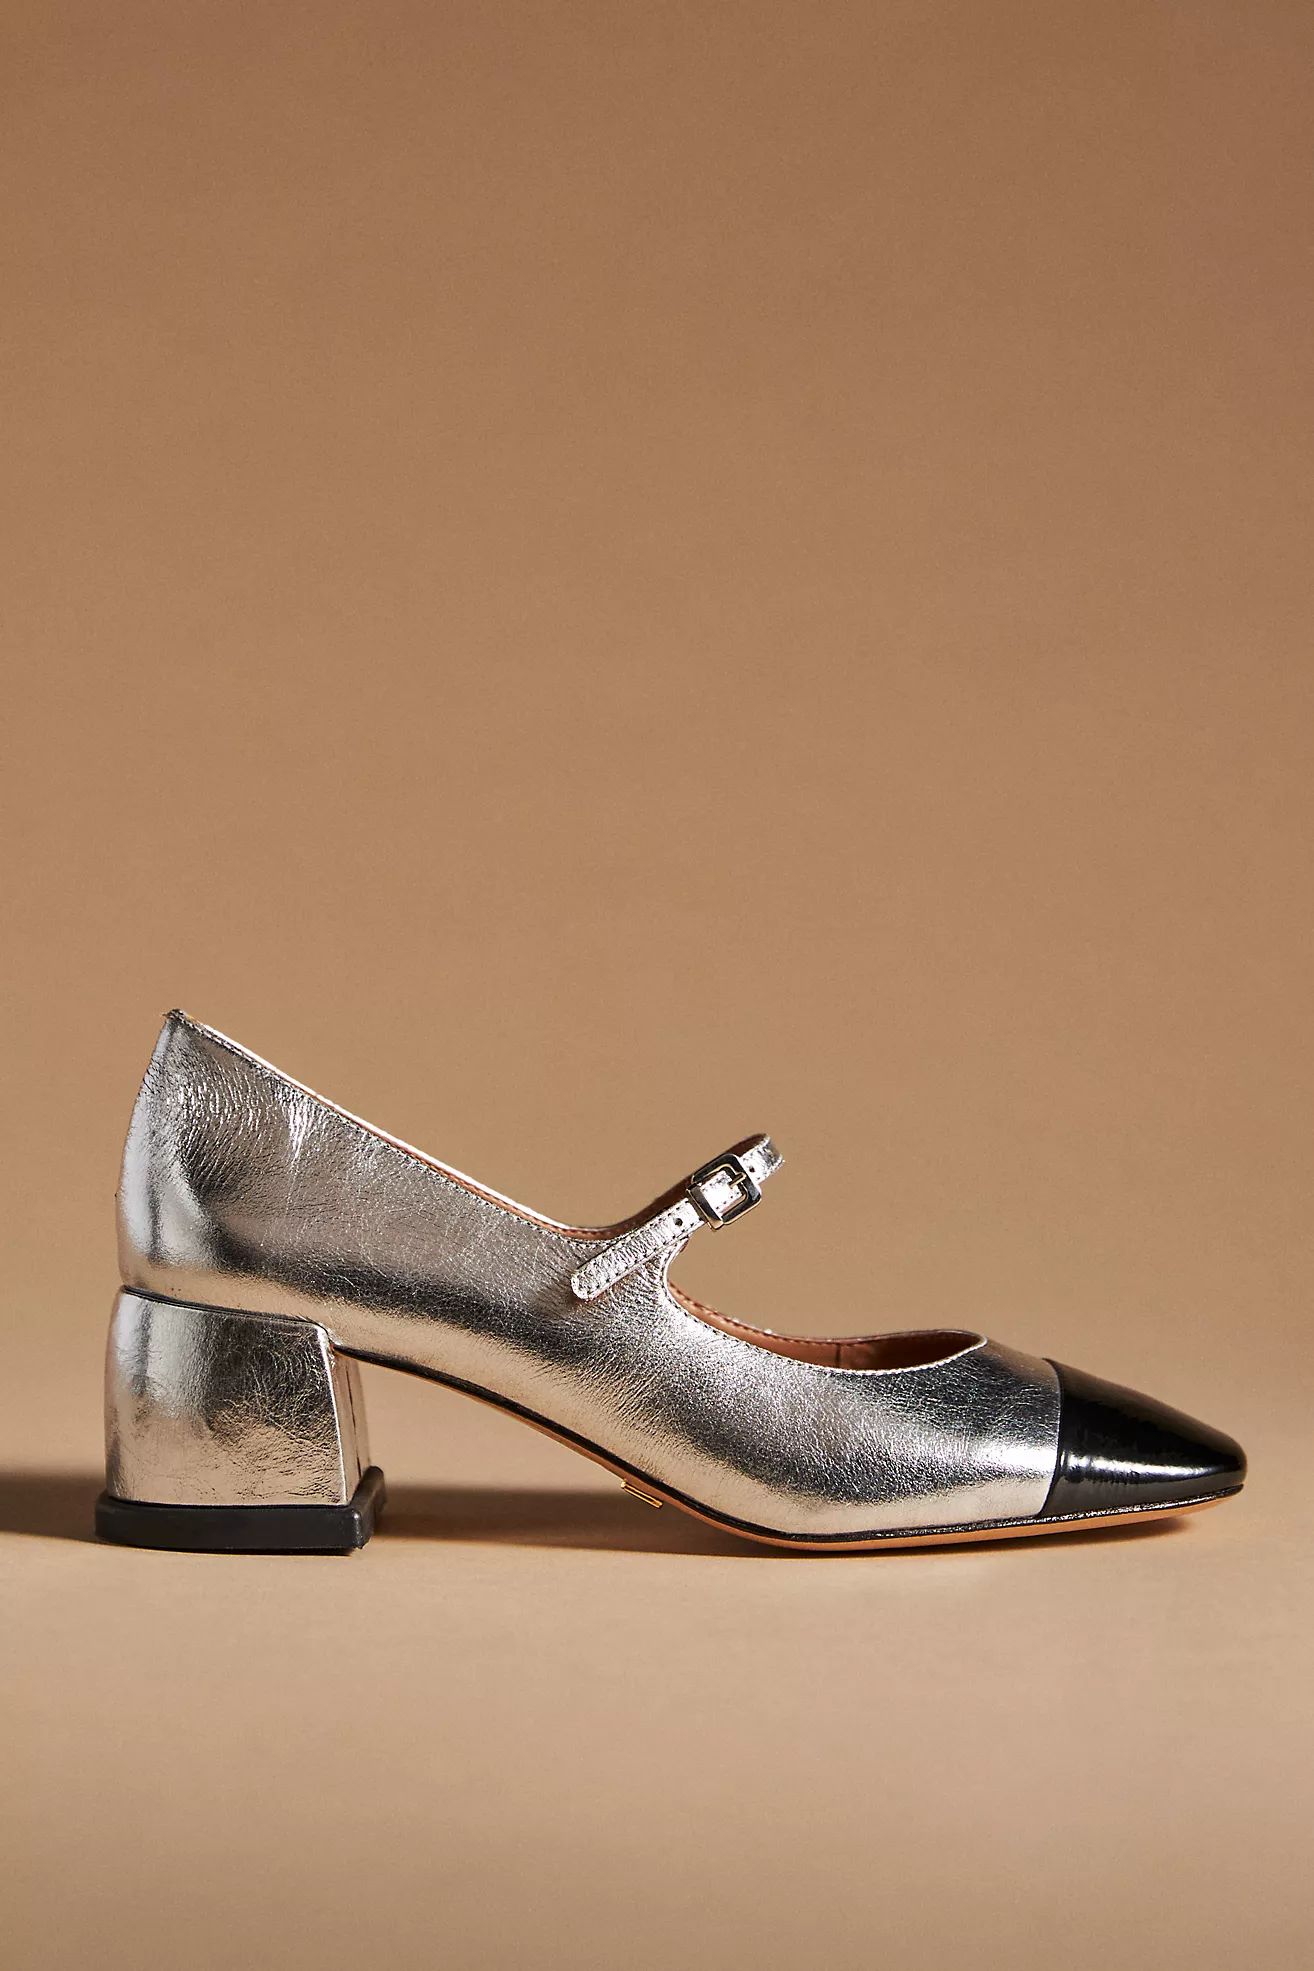 Vicenza Leather Colourblock Mary Janes Heels | Anthropologie (UK)